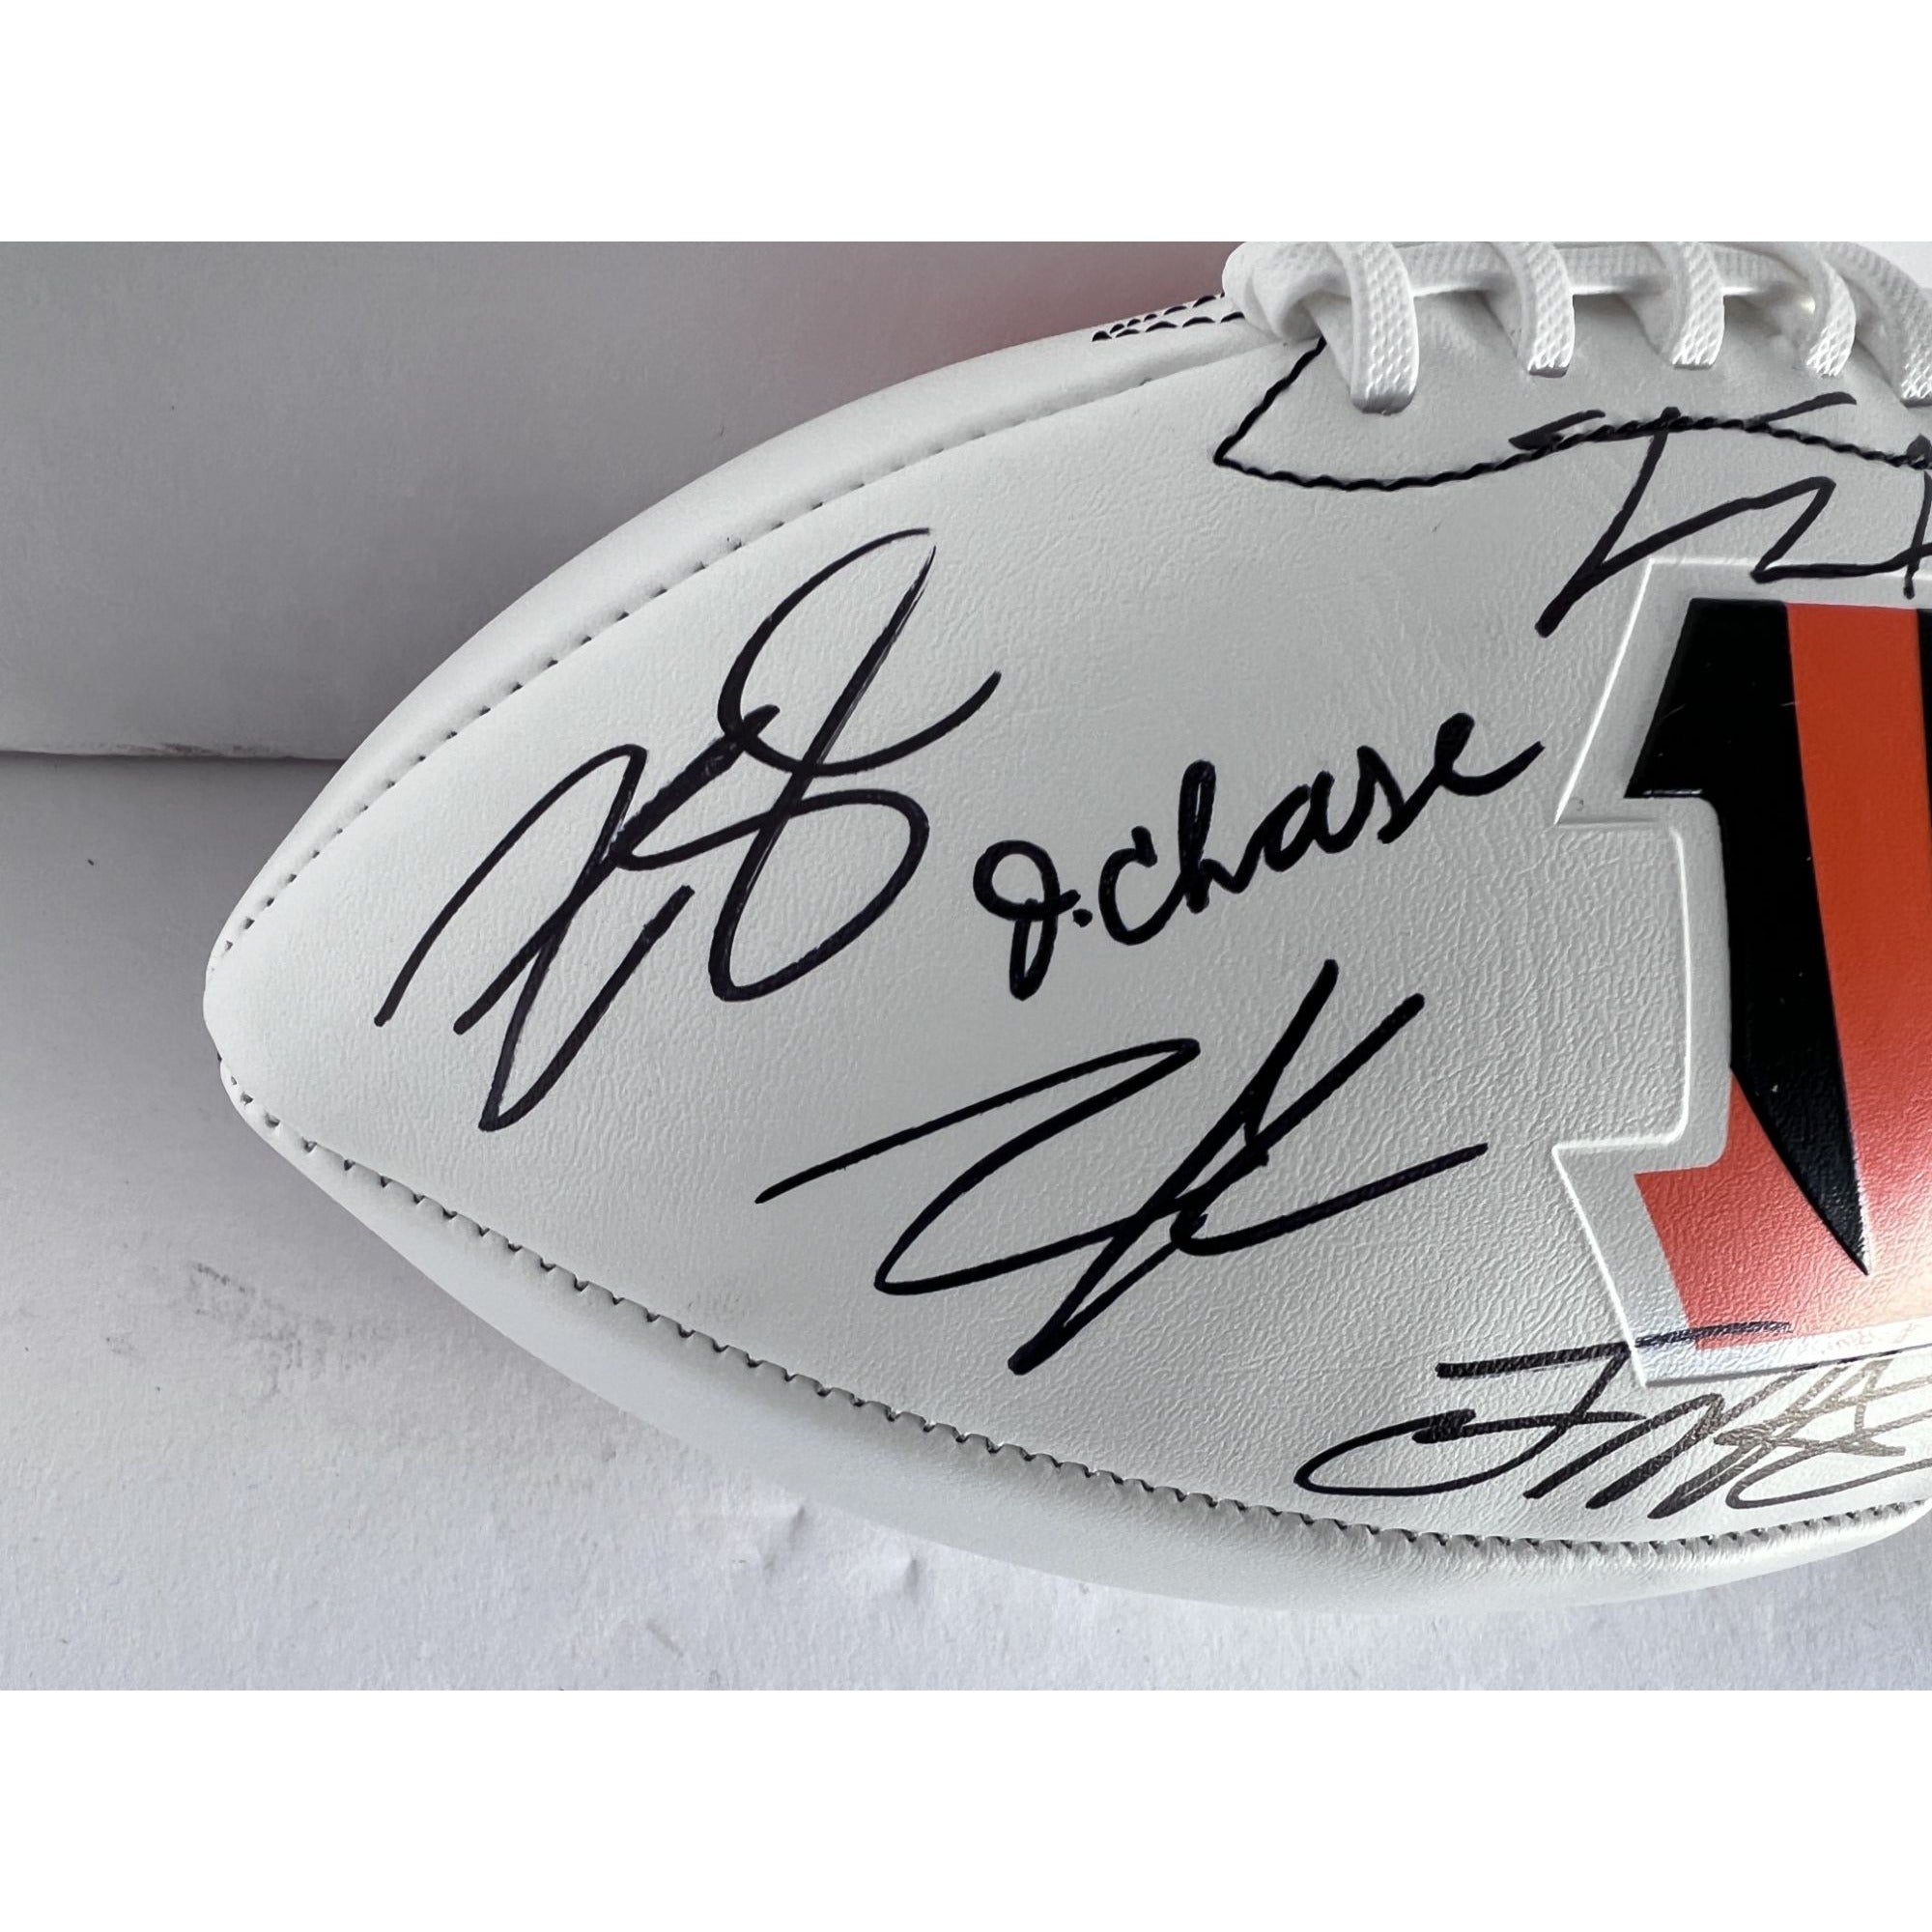 Joe Burrow and Ja'Marr Chase, Joe Mixon, Zach Taylor and more Cincinnati Bengals full size Bengals football signed with proof